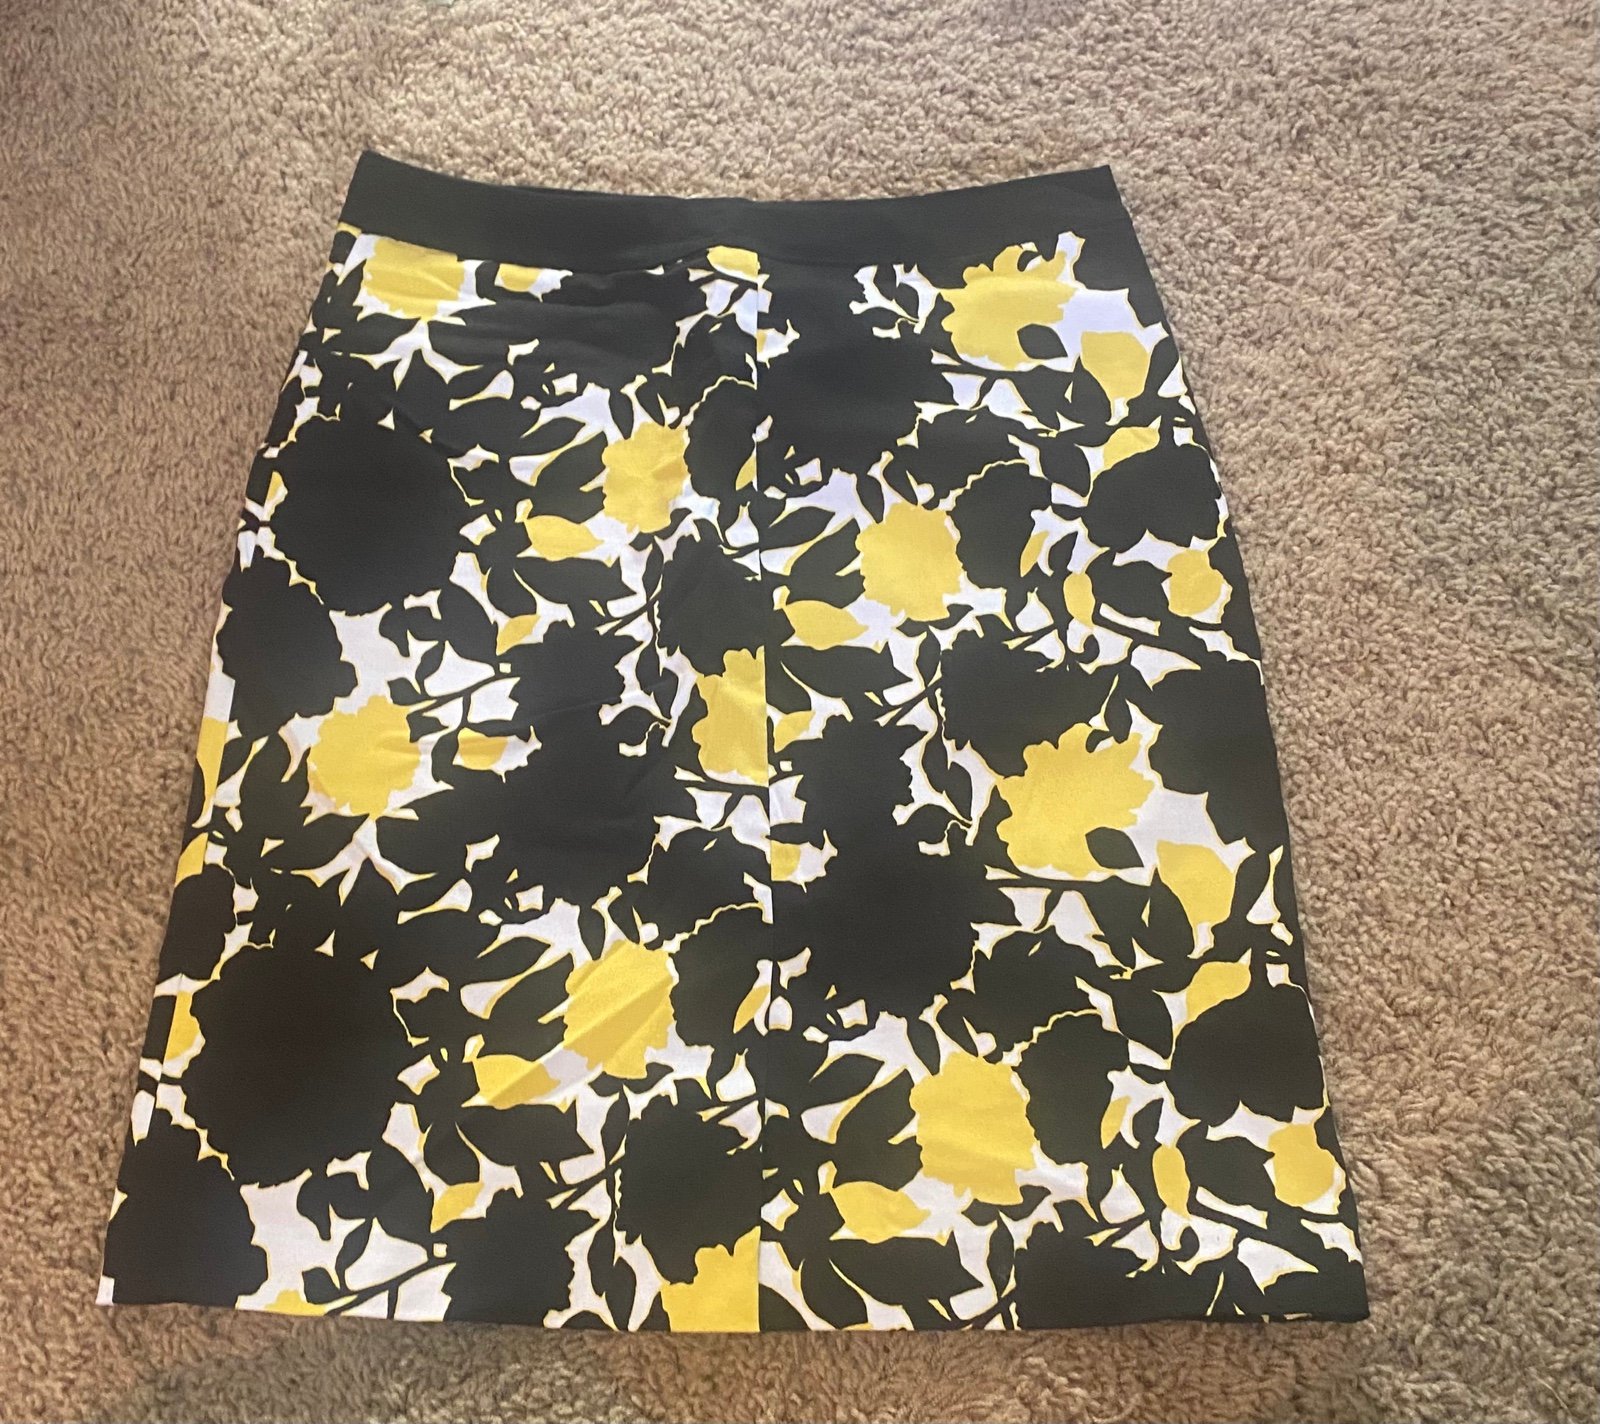 Simple Yellow Skirt Plb0Eatwc just buy it